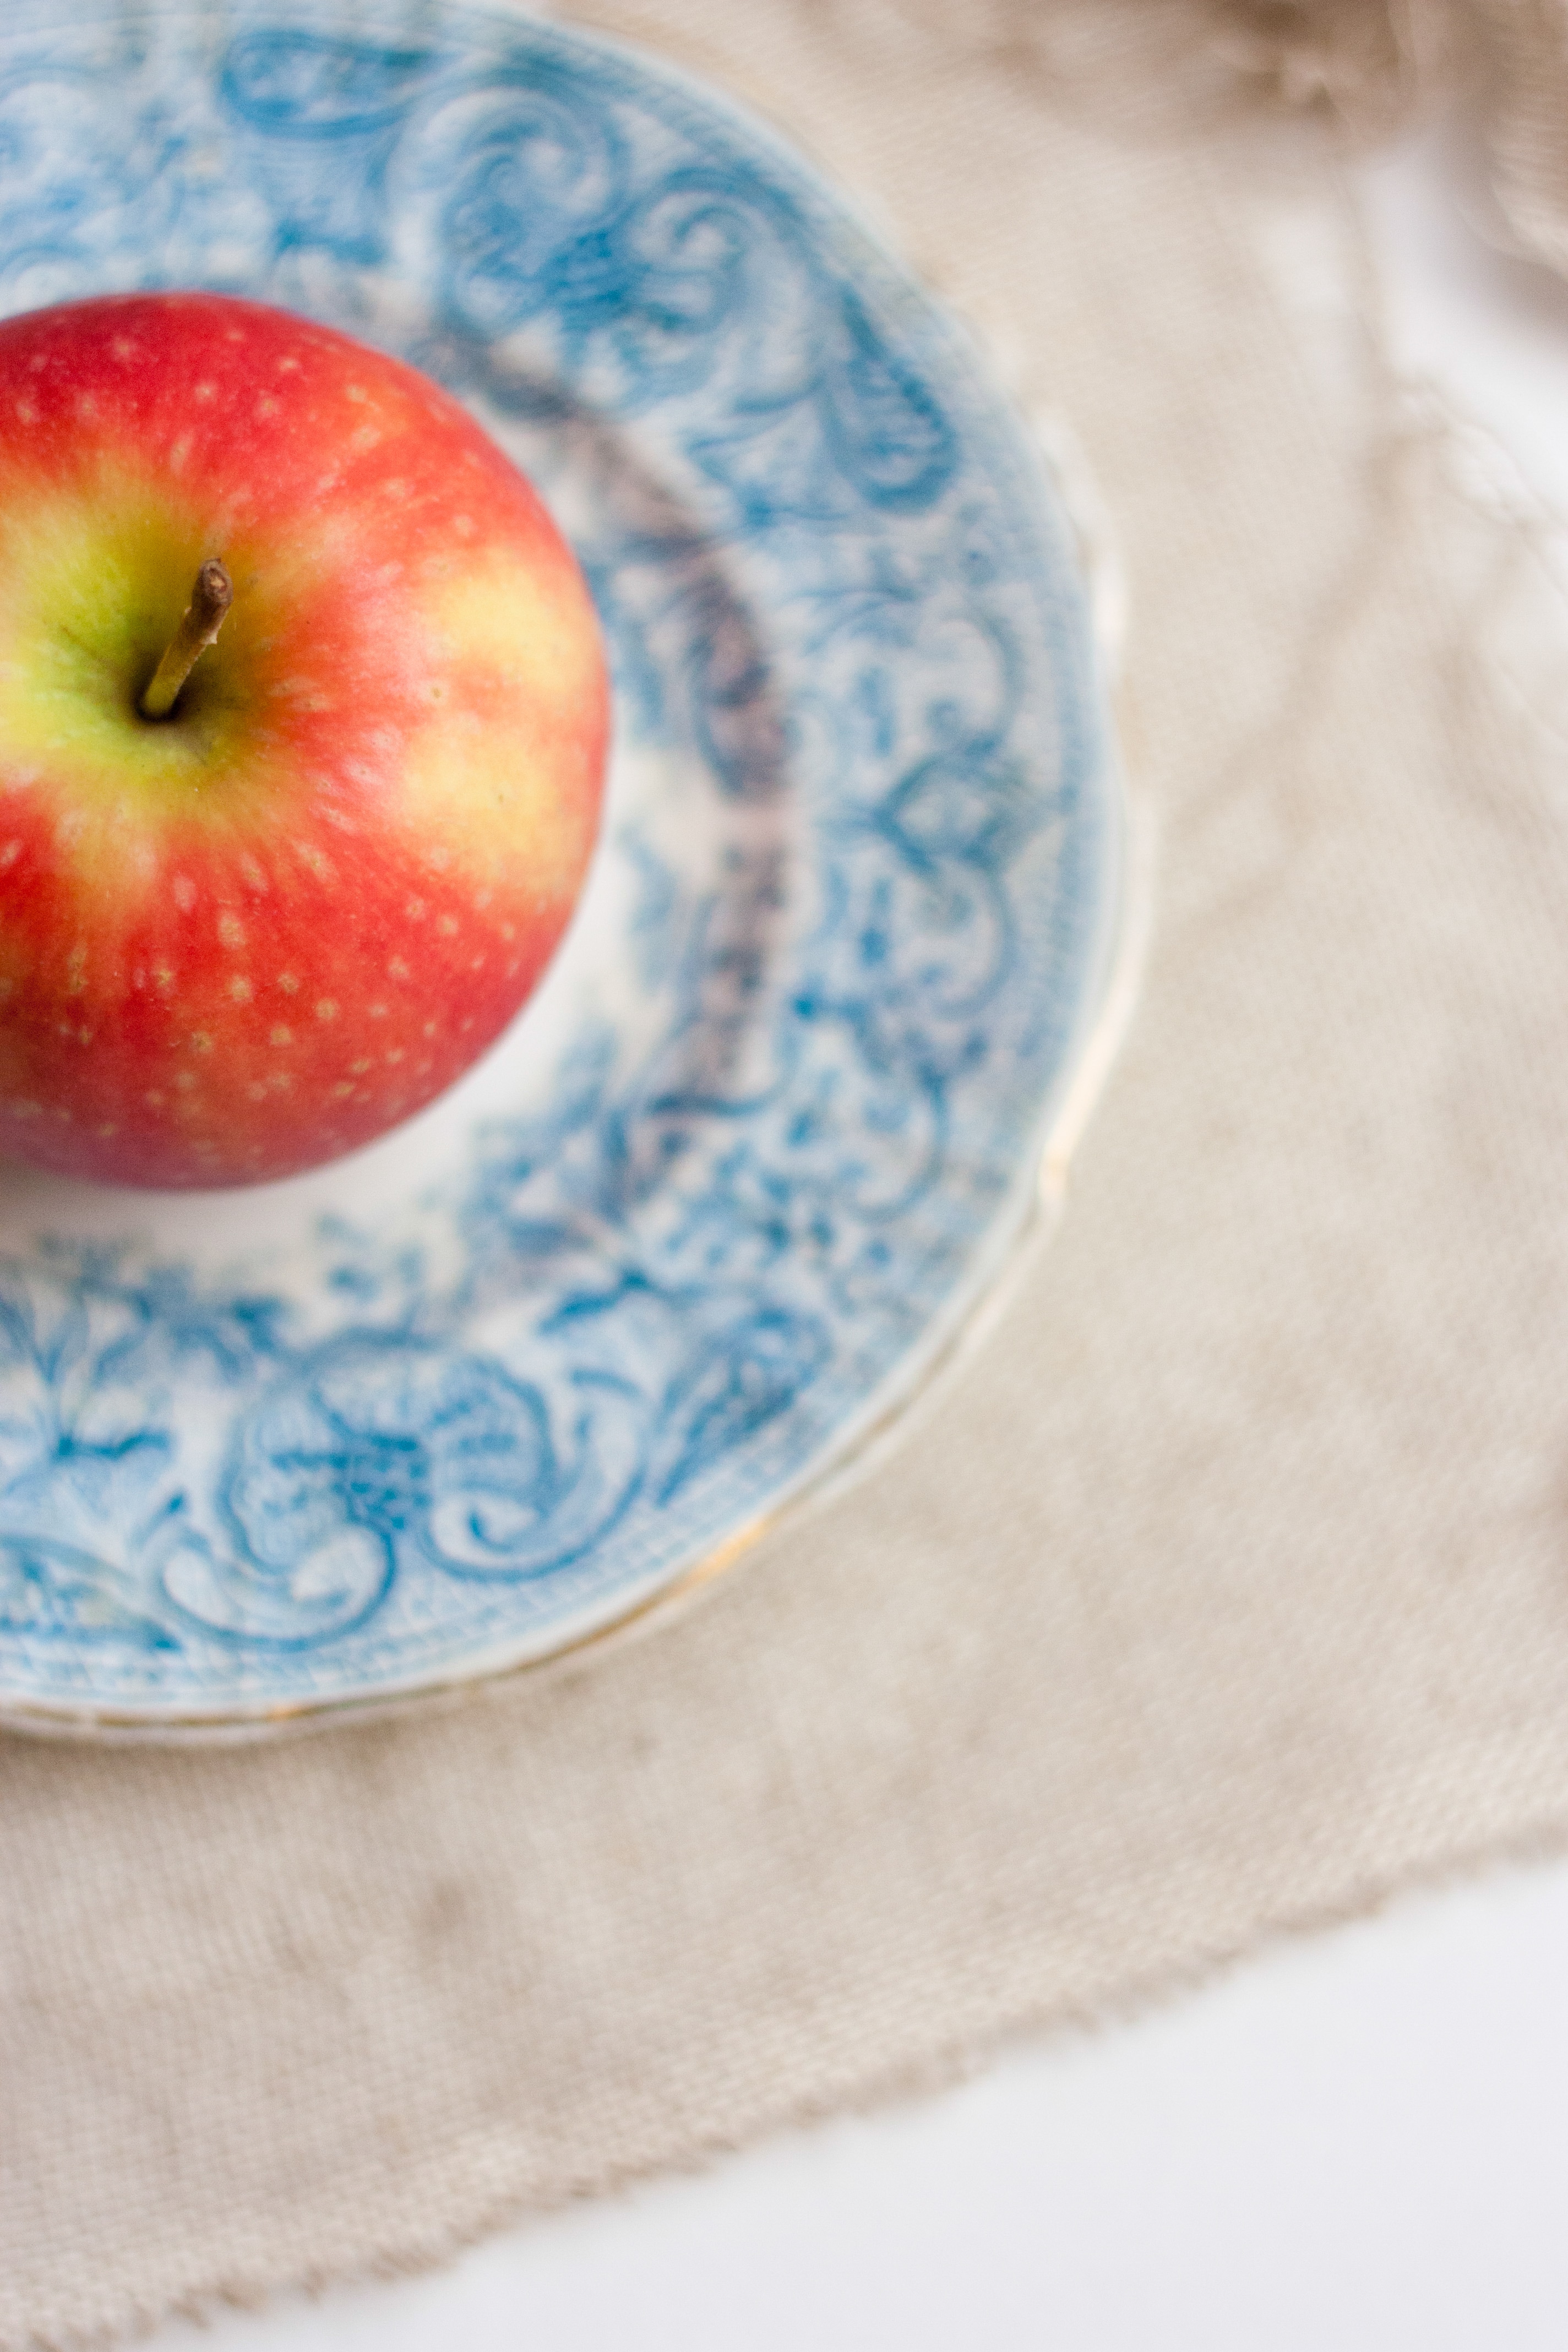 red apple fruit and white and blue ceramic plate